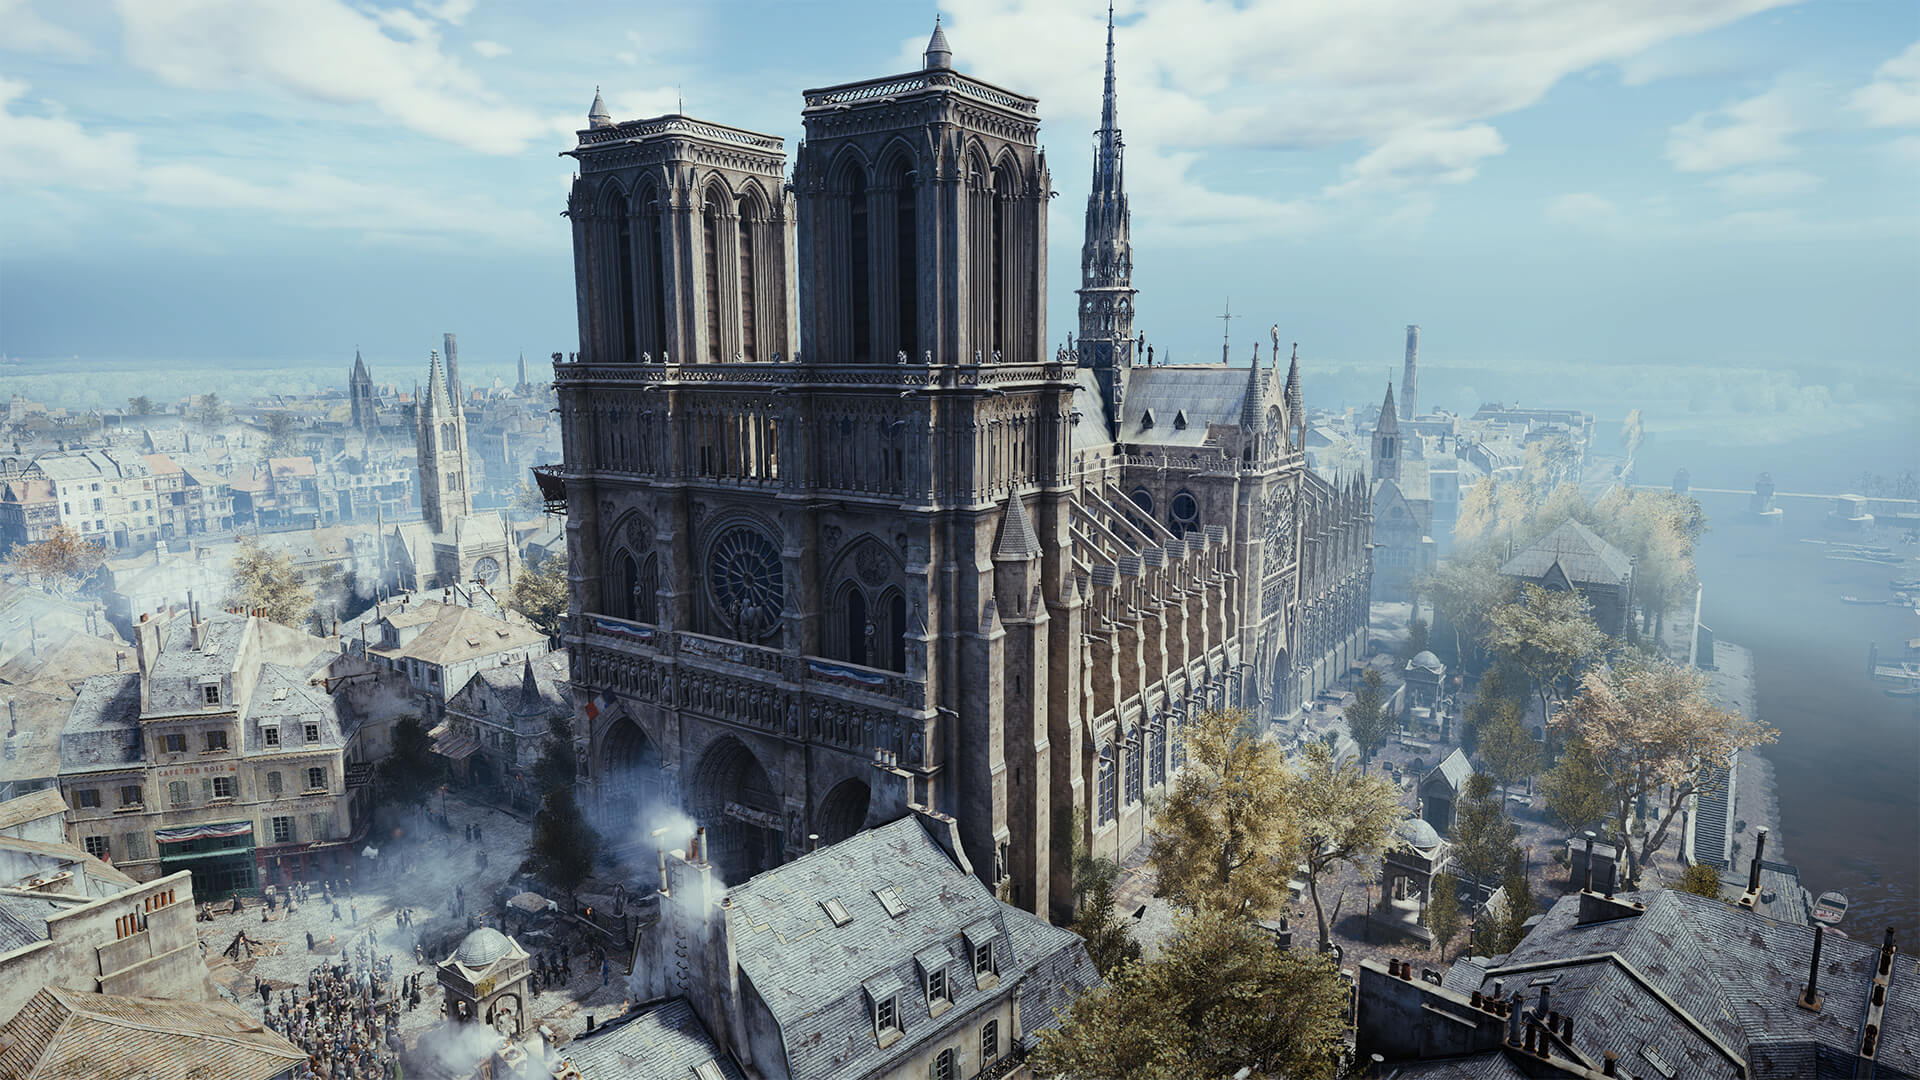 Ubisoft Gives Away Assassin’s Creed Unity For Free To Aid Notre Dame Rebuilding Donations